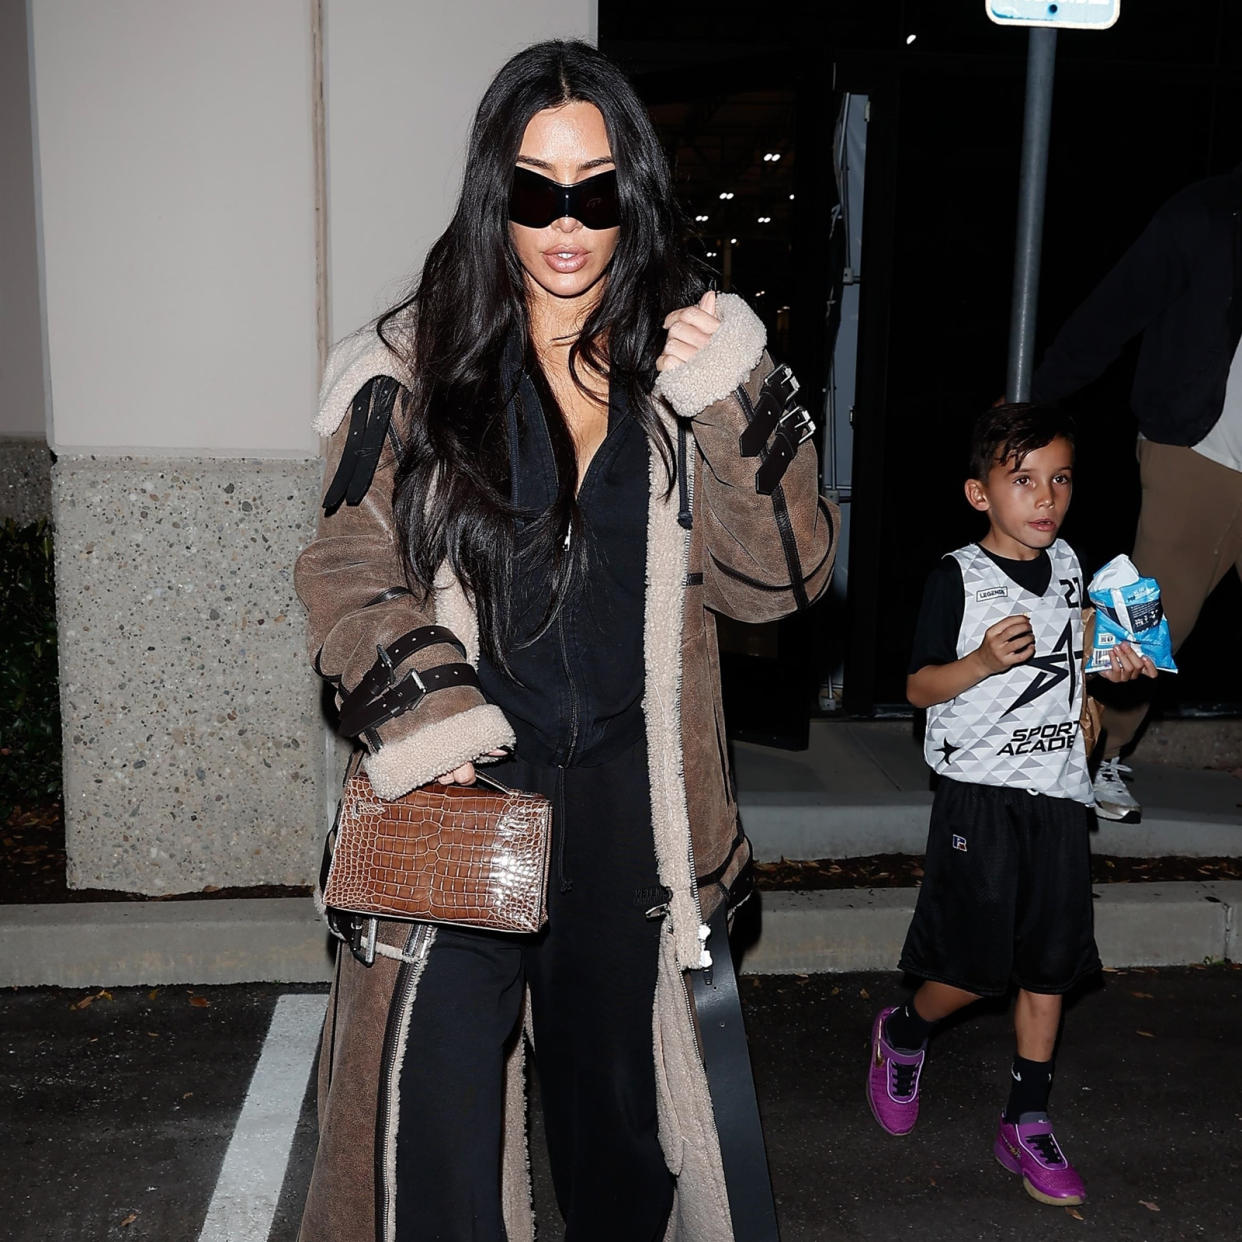  Kim Kardashian wearing a floor-length fur coat with an all-black outfit . 